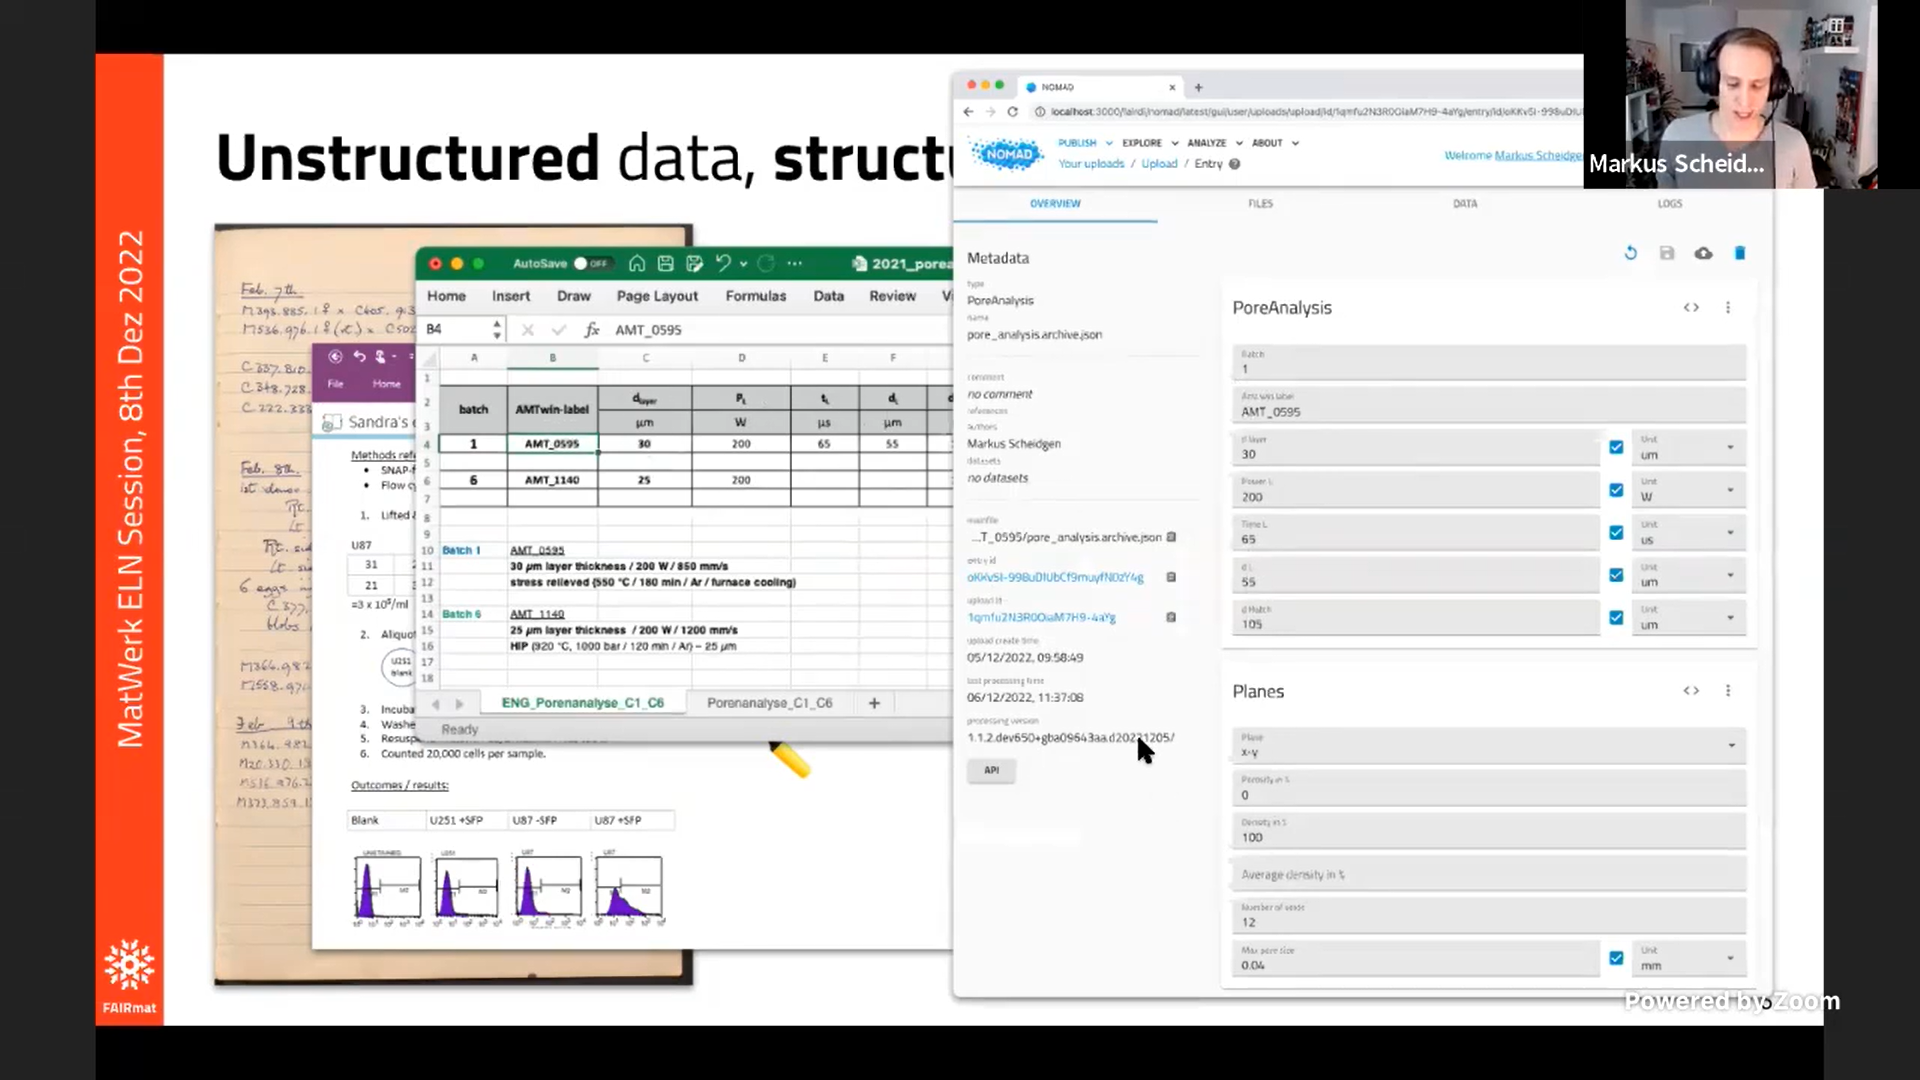 Structured data acquisation with NOMAD's ELN functions